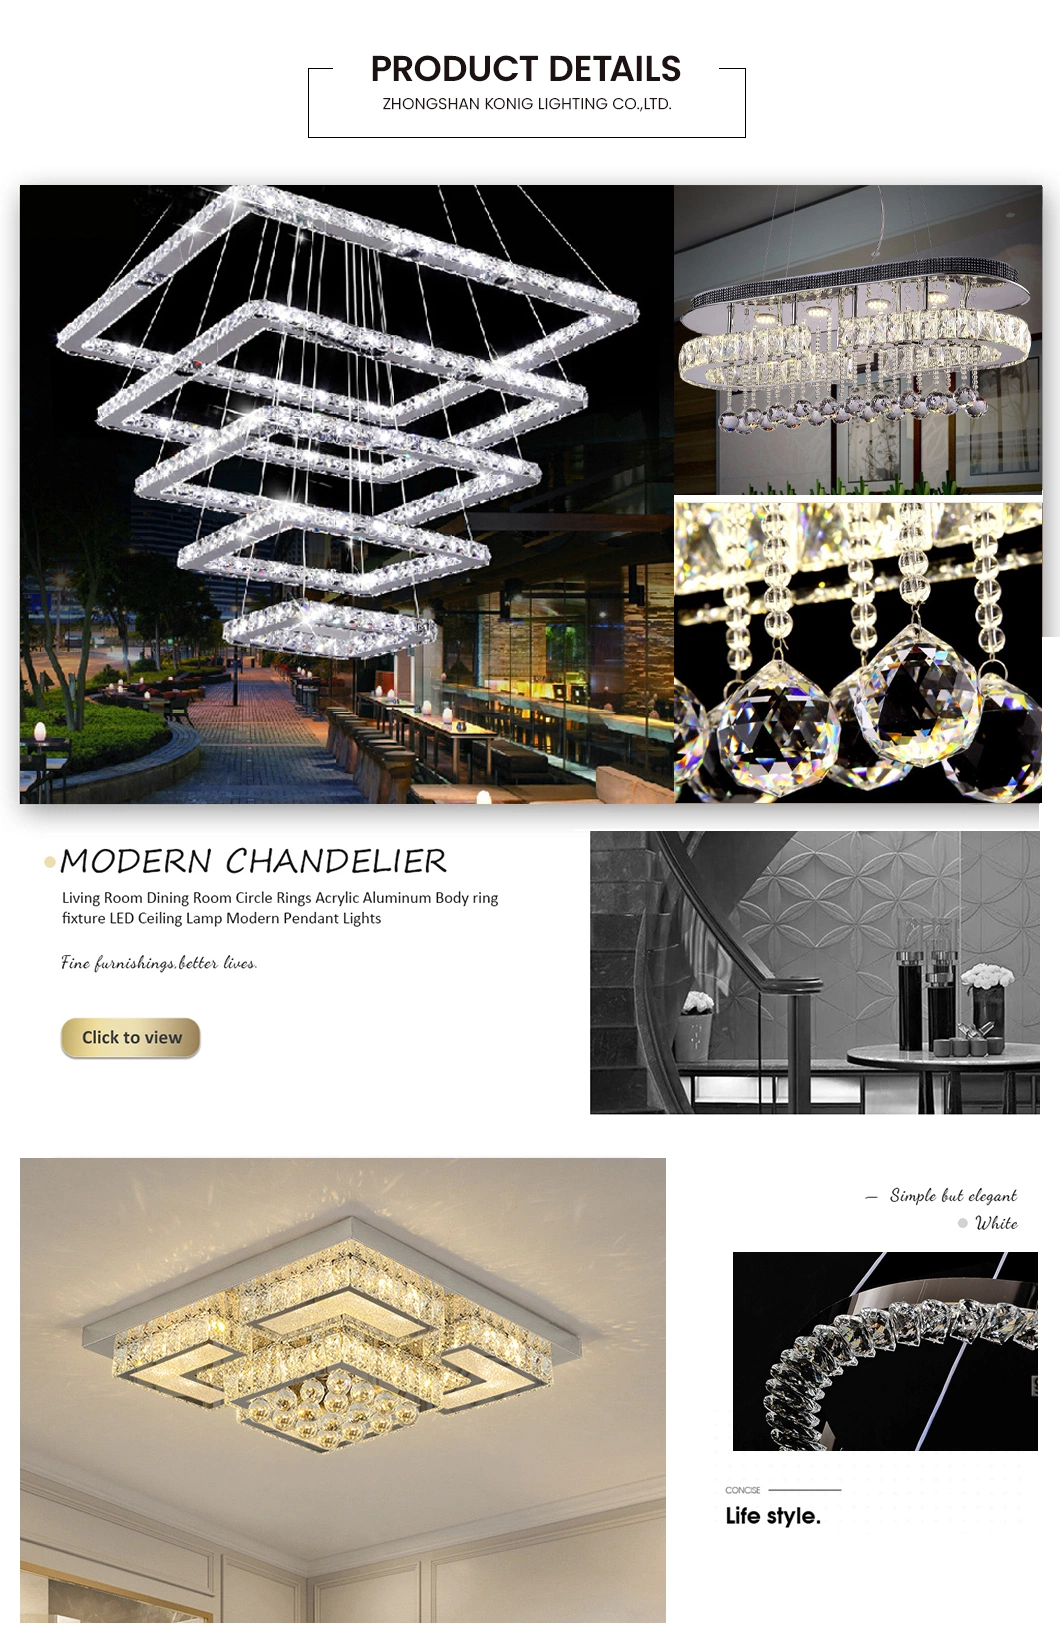 New Crystal Chandelier Factory China Indoors Chandelier Manufacturer Turkish Postmodern Luxury K9 Crystal Gold Ceiling Clear Glass Dining Room Long Chandelier